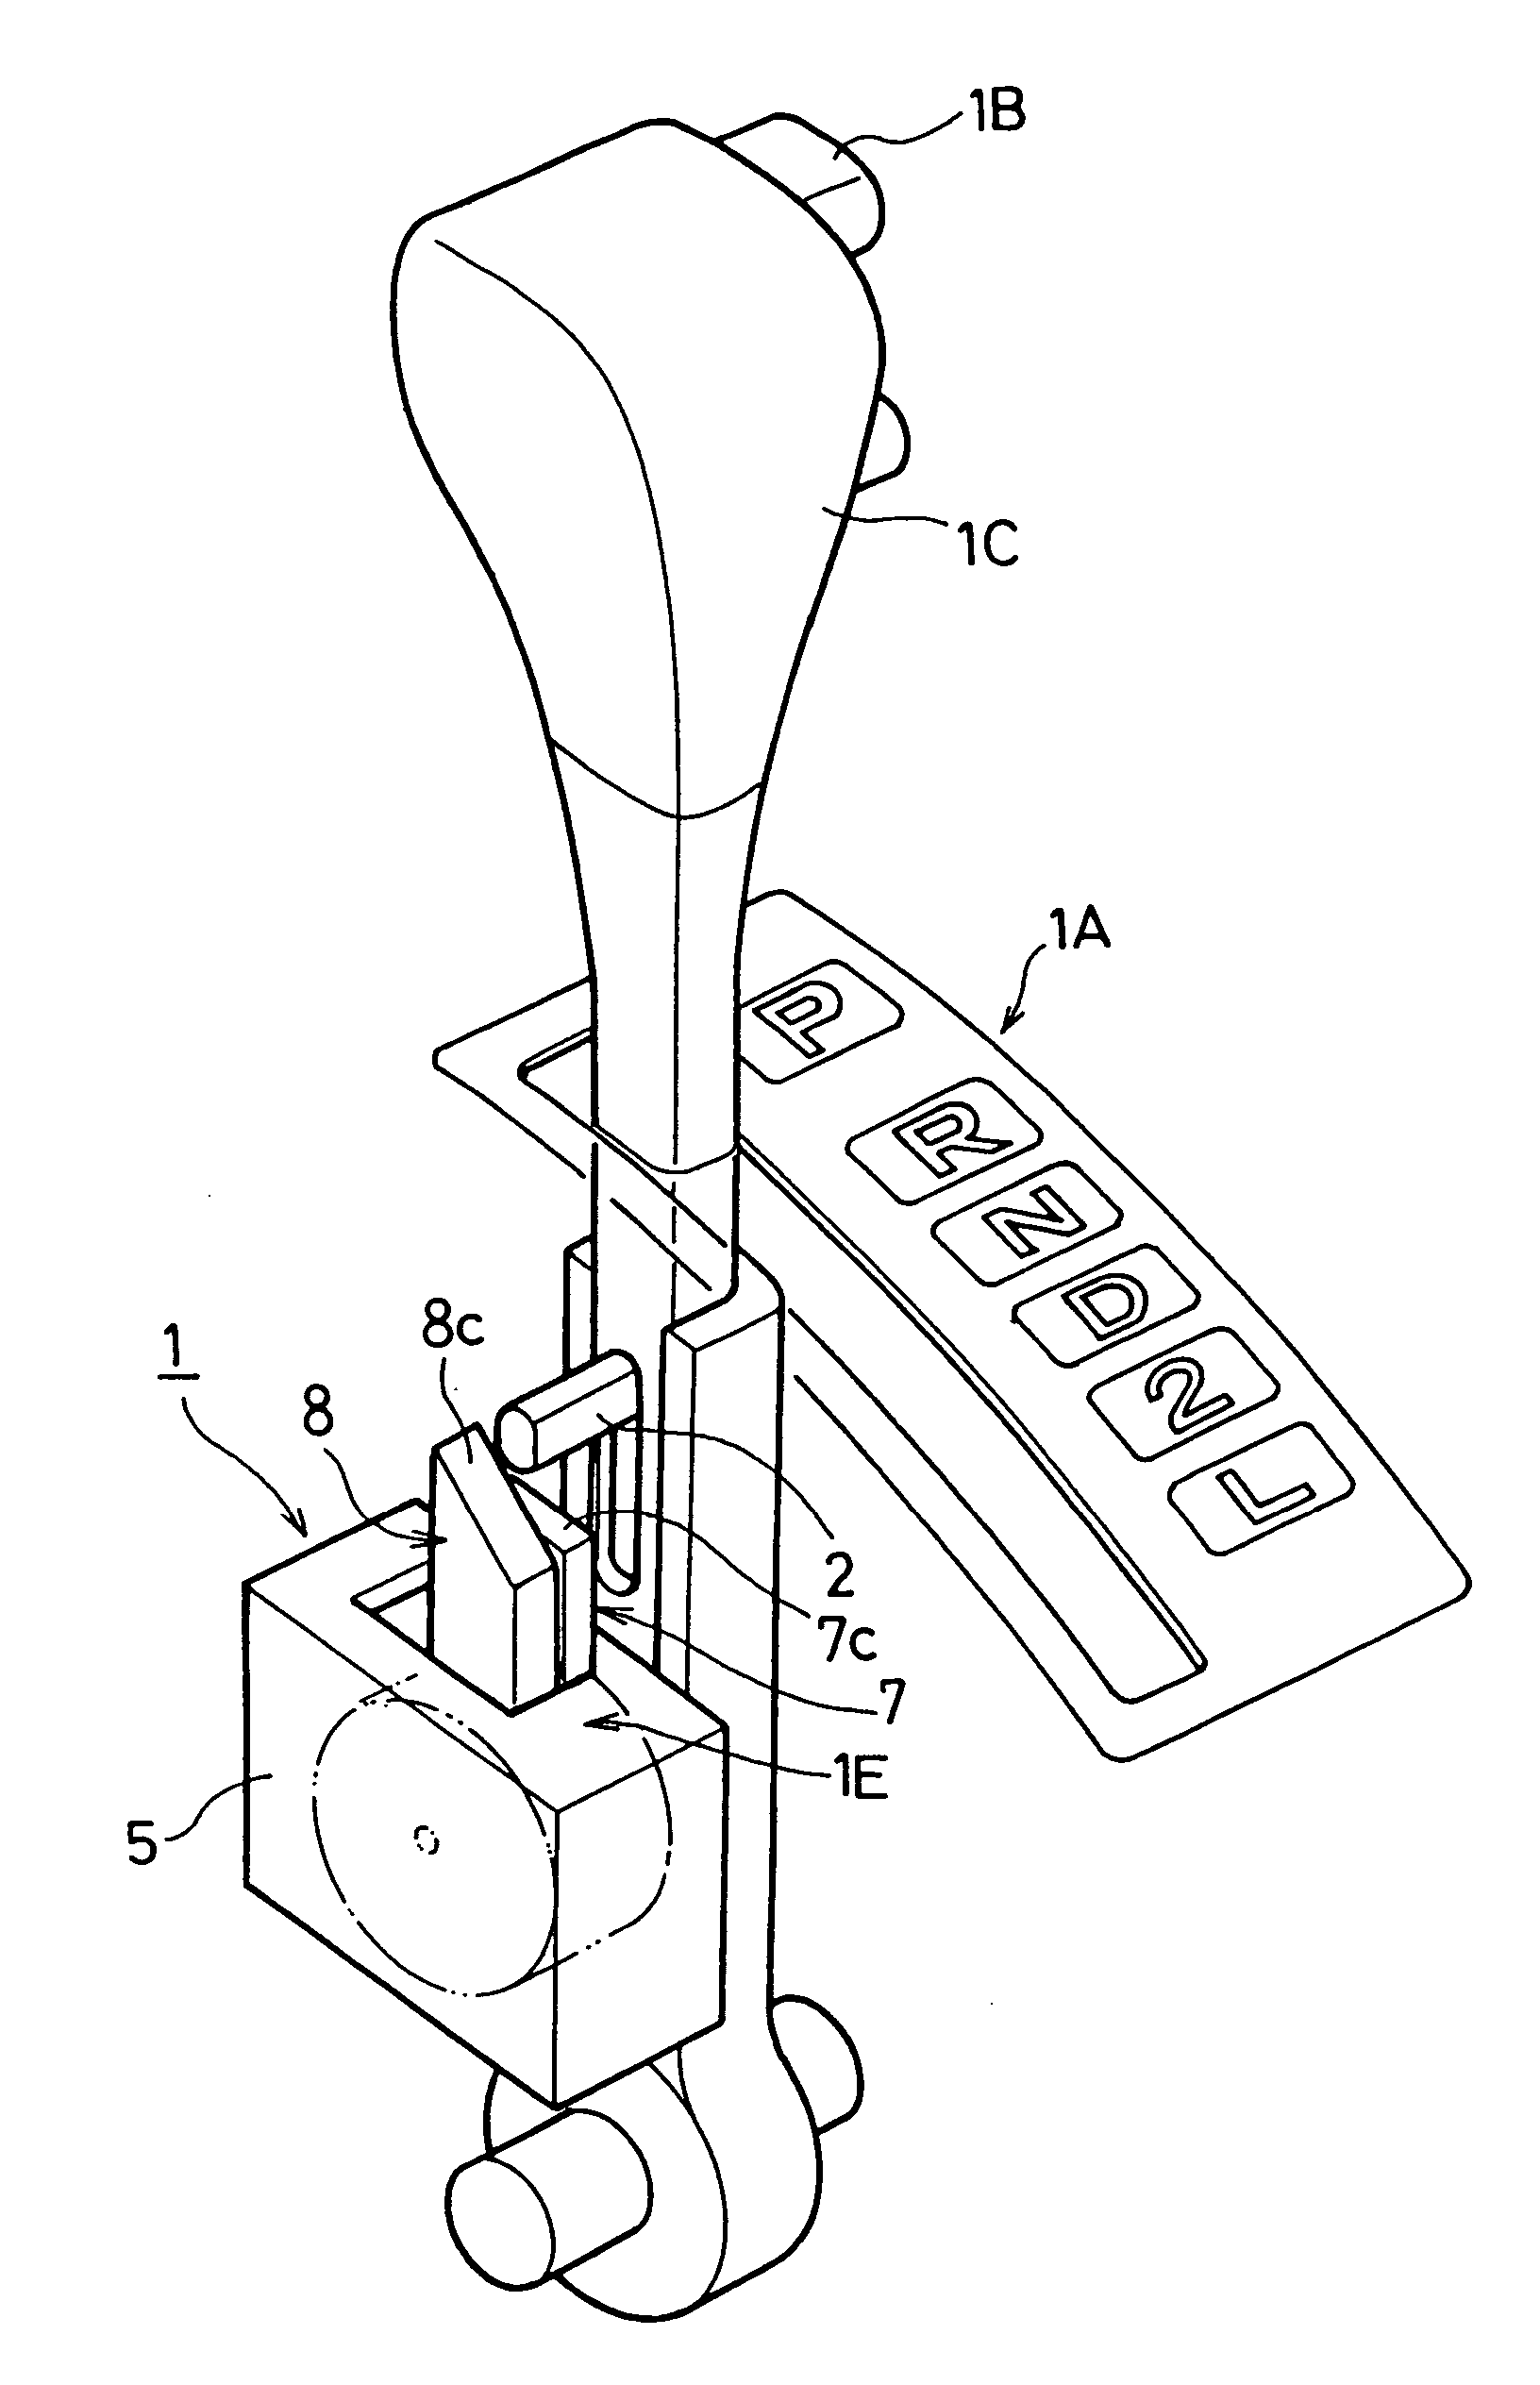 Shift lever lock device for vehicular automatic transmission